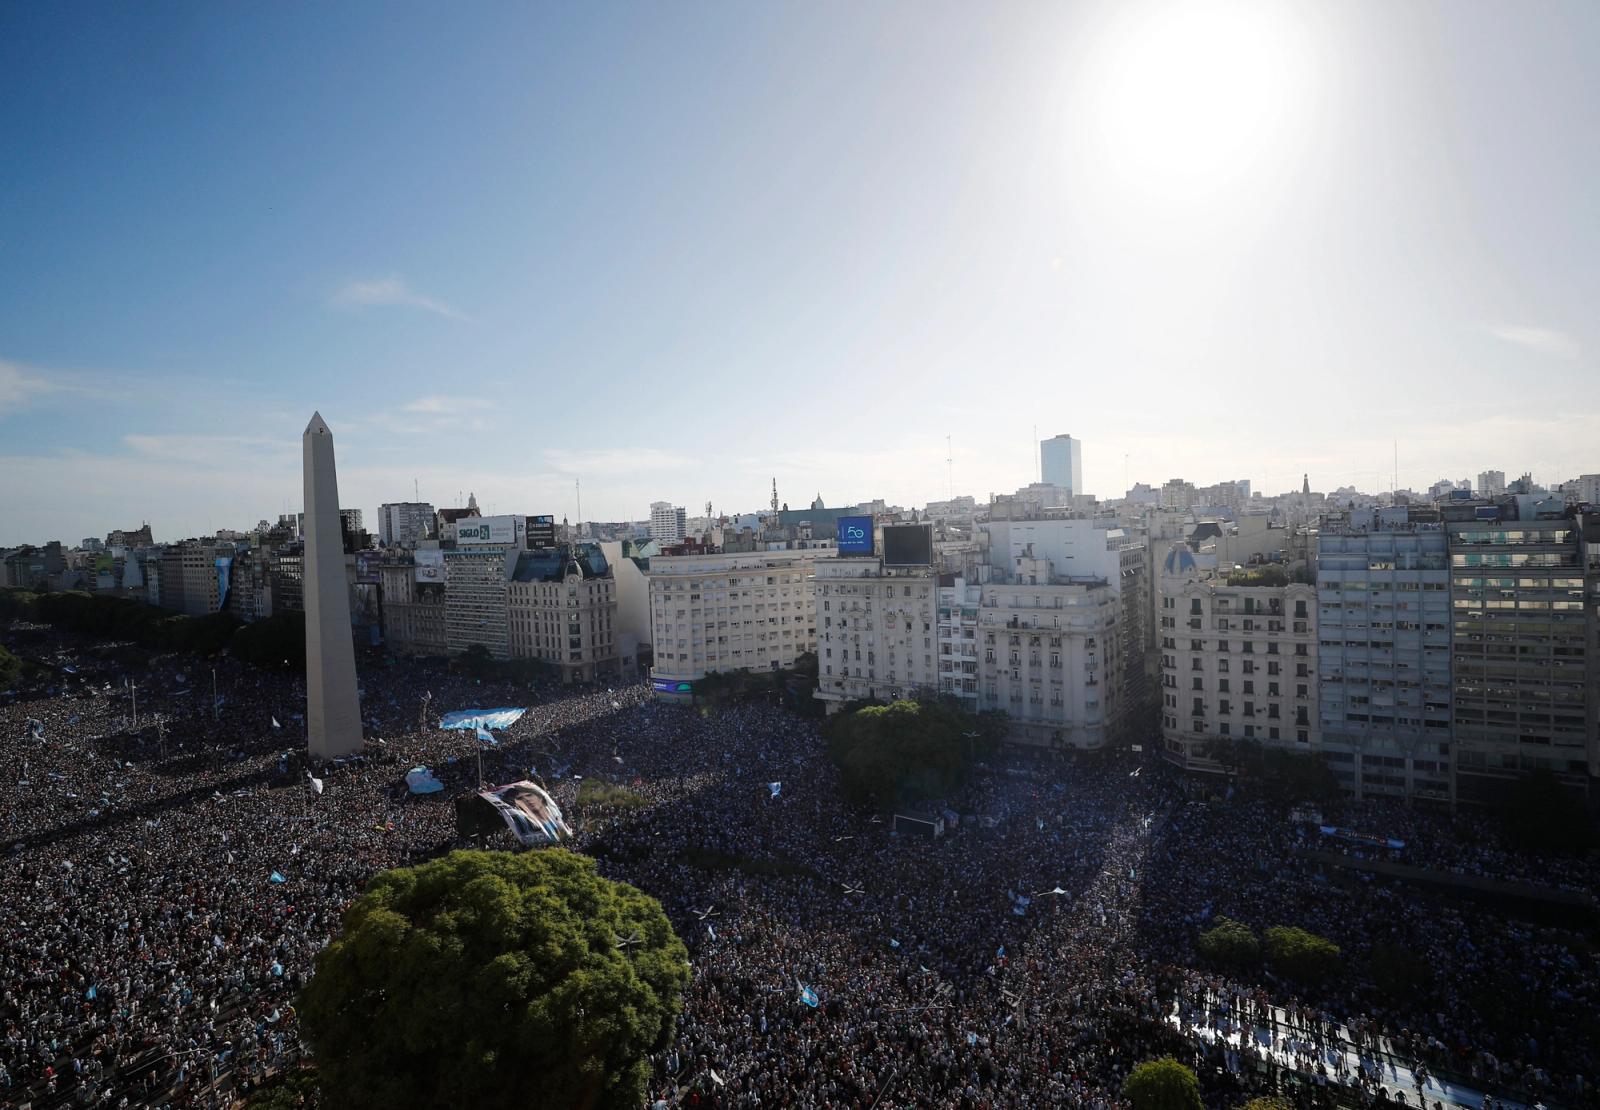 Argentina fans celebrate winning the World Cup by the Obelisco